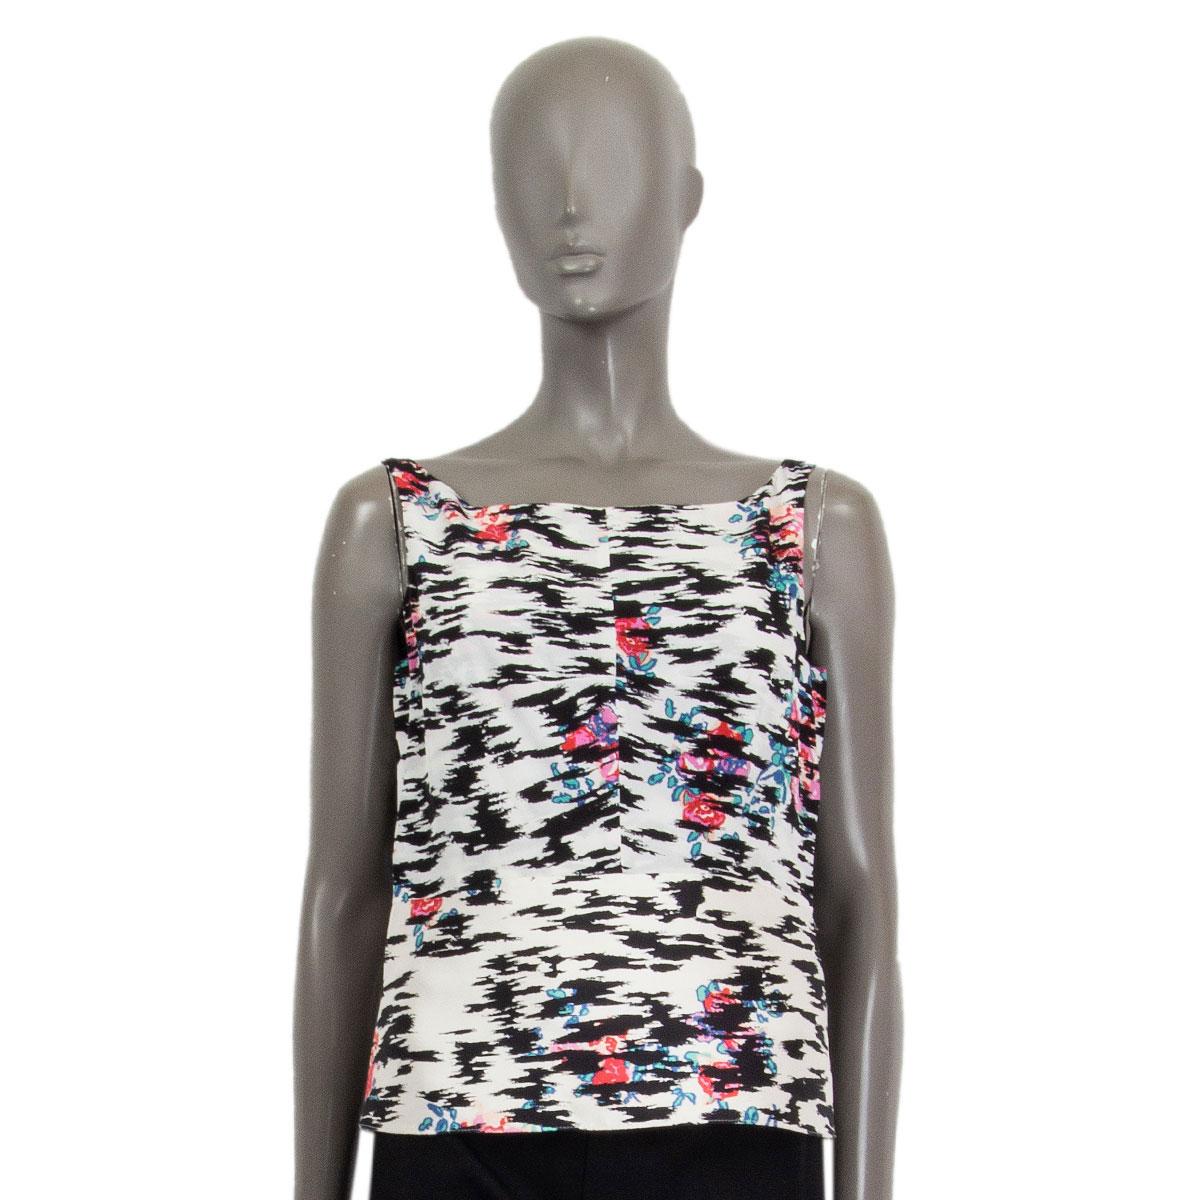 100% authentic Balenciaga sleeveless blouse in white, off-white, black, red, pink, blue and turquoise rose printed silk (100%). Bottom half has interior facing which makes it stiffer and structured. Hidden zipper starts at bottom hem and zips